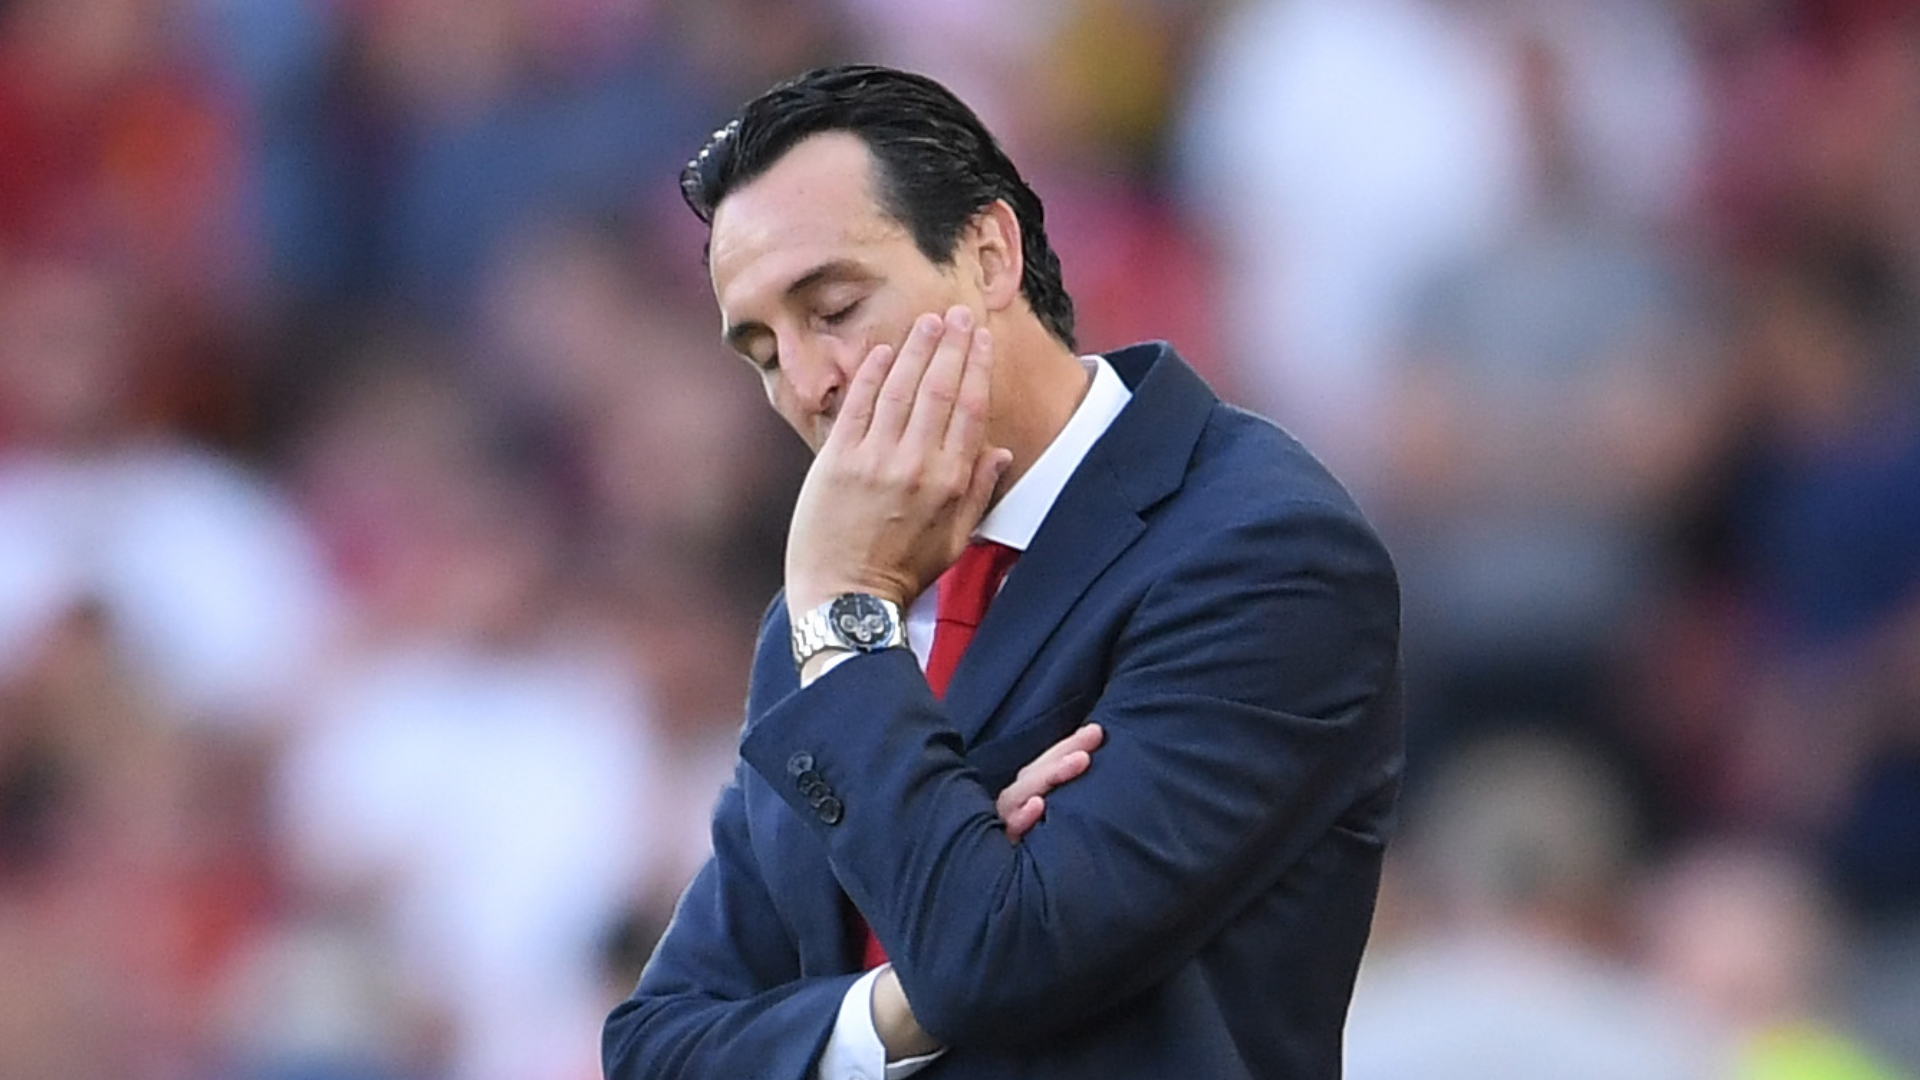 'Thank you for absolutely nothing' - Nigeria fans react as Arsenal sack Emery